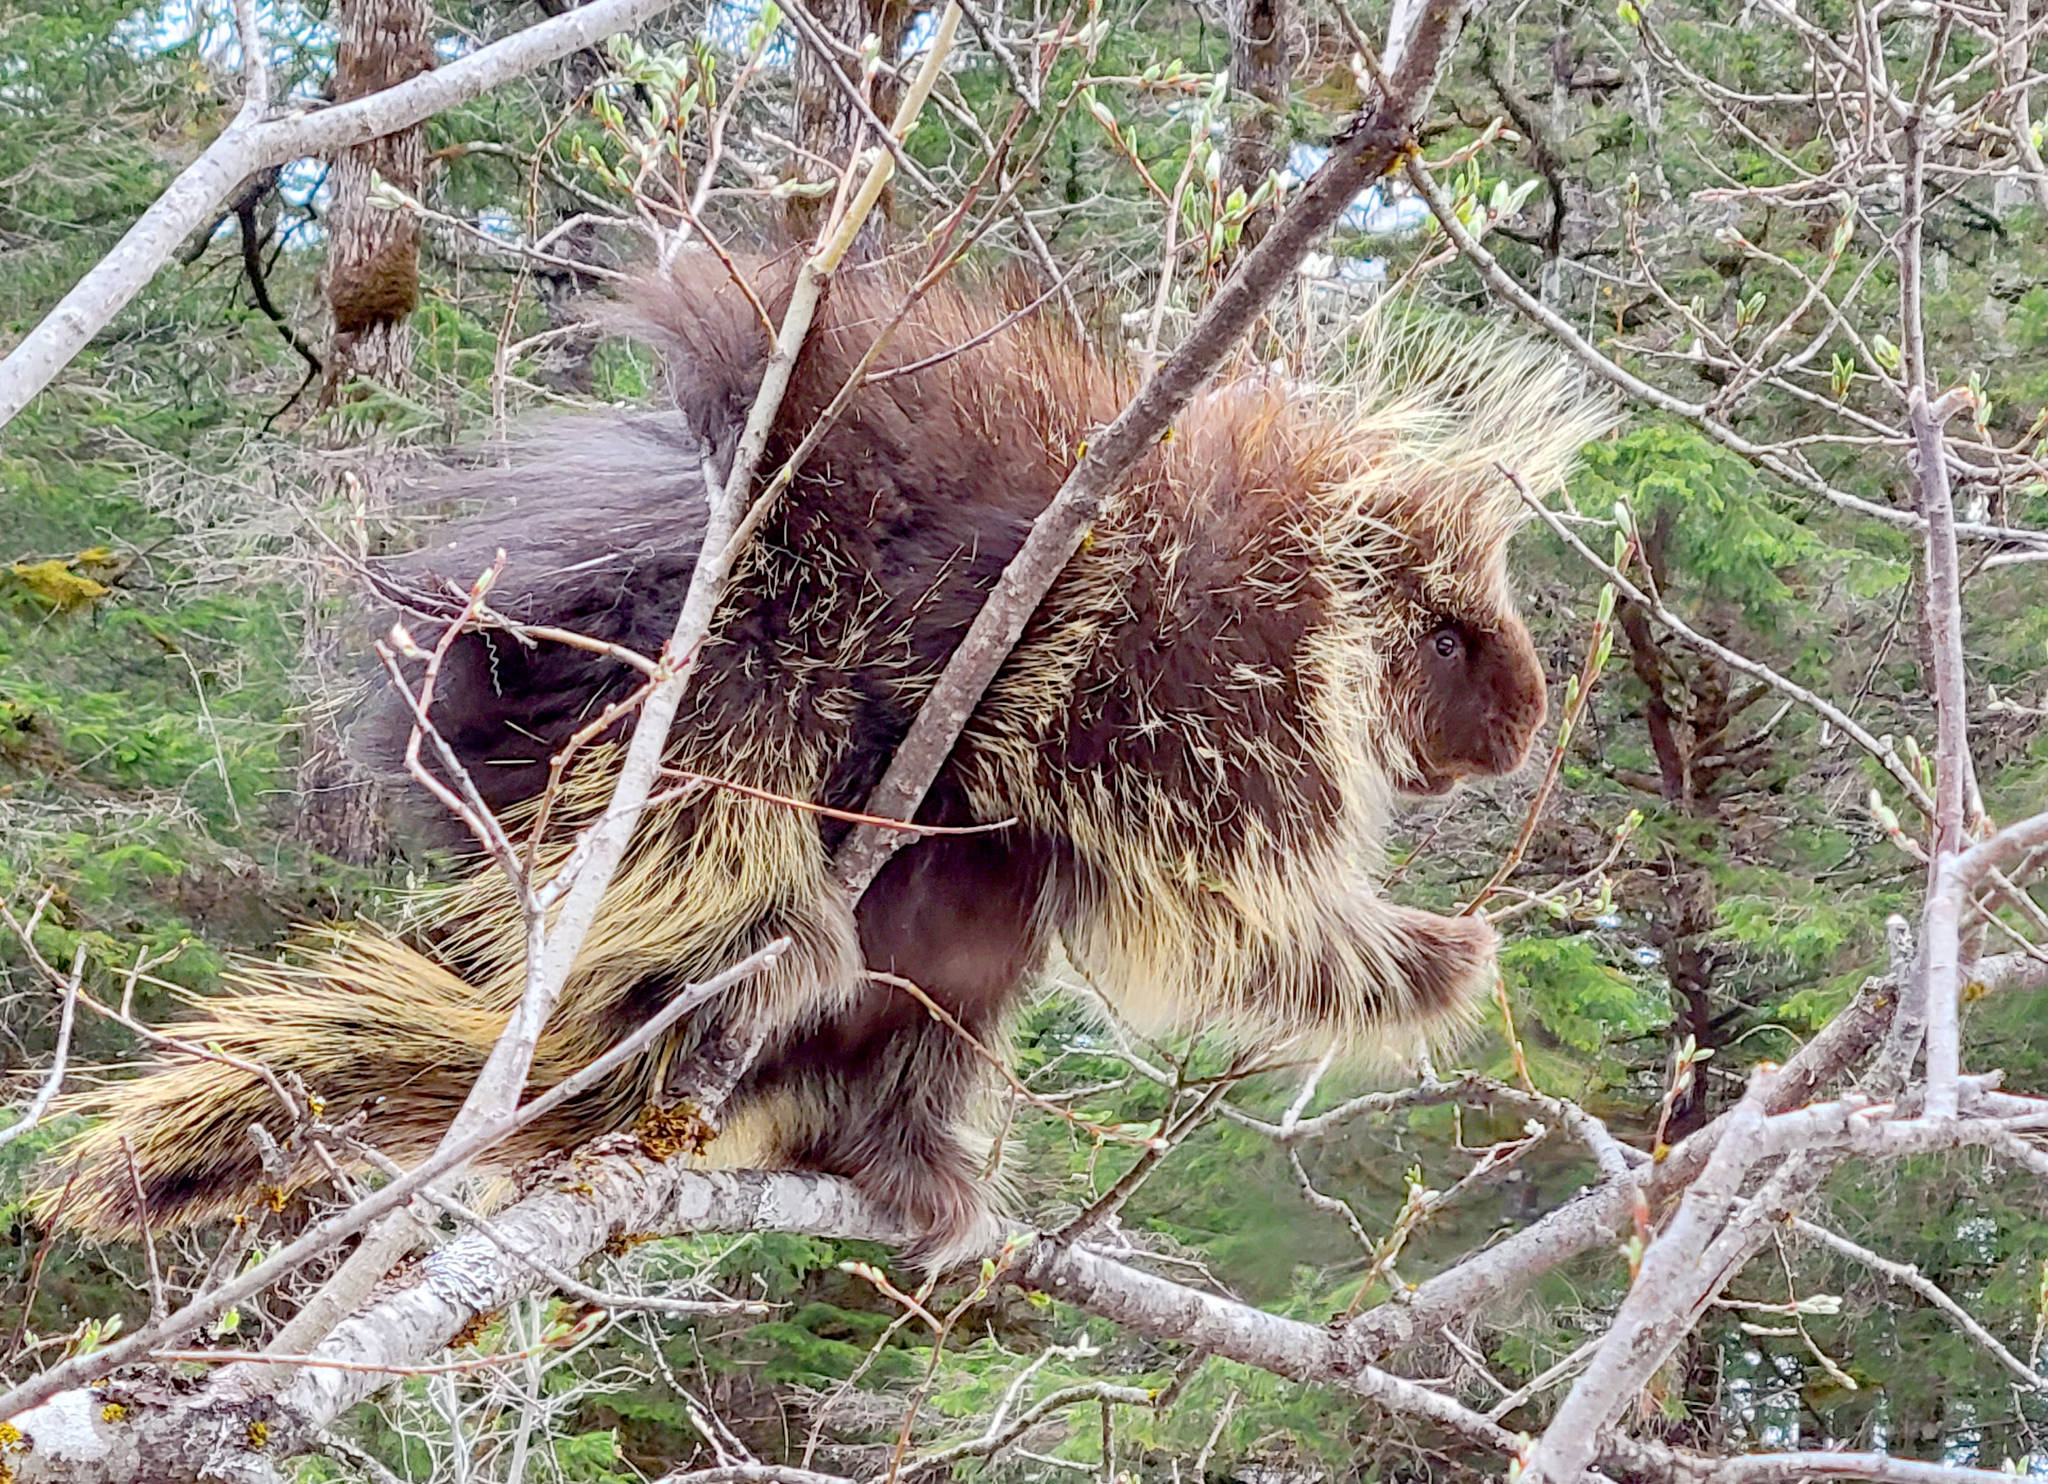 A porcupine dines along Perseverance Trail on May 2. “Porcupine: What’s up? Just hanging out, having a few buds,” writes Randy Burton. (Courtesy Photo / Randy Burton)